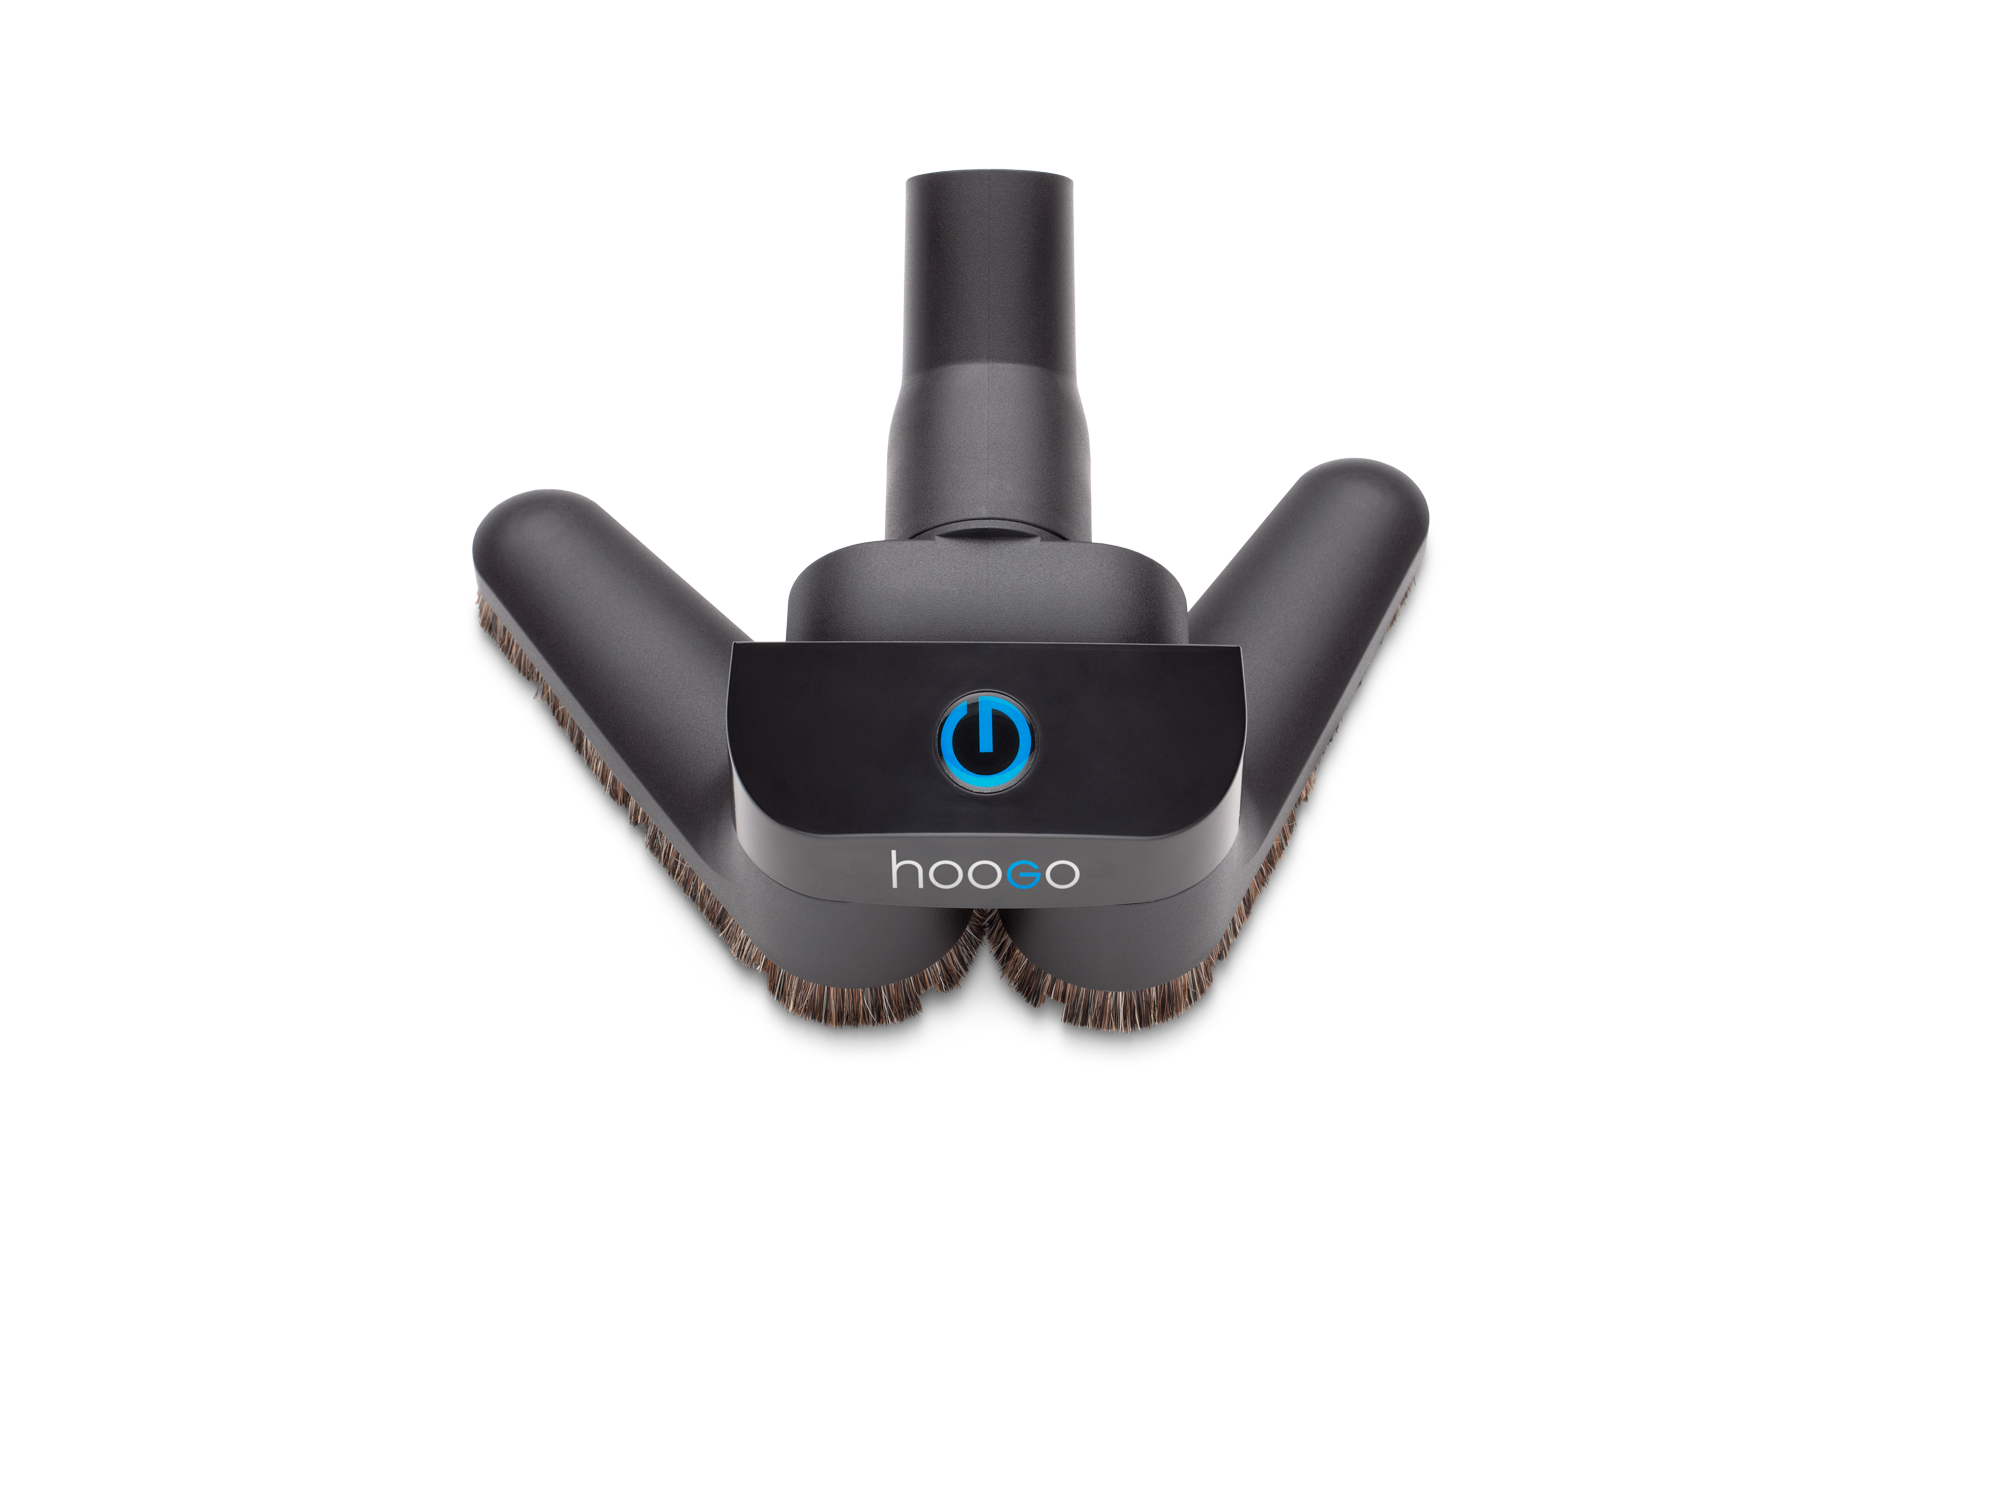 Revolution of homecleaning - hoogo flipflop nozzle